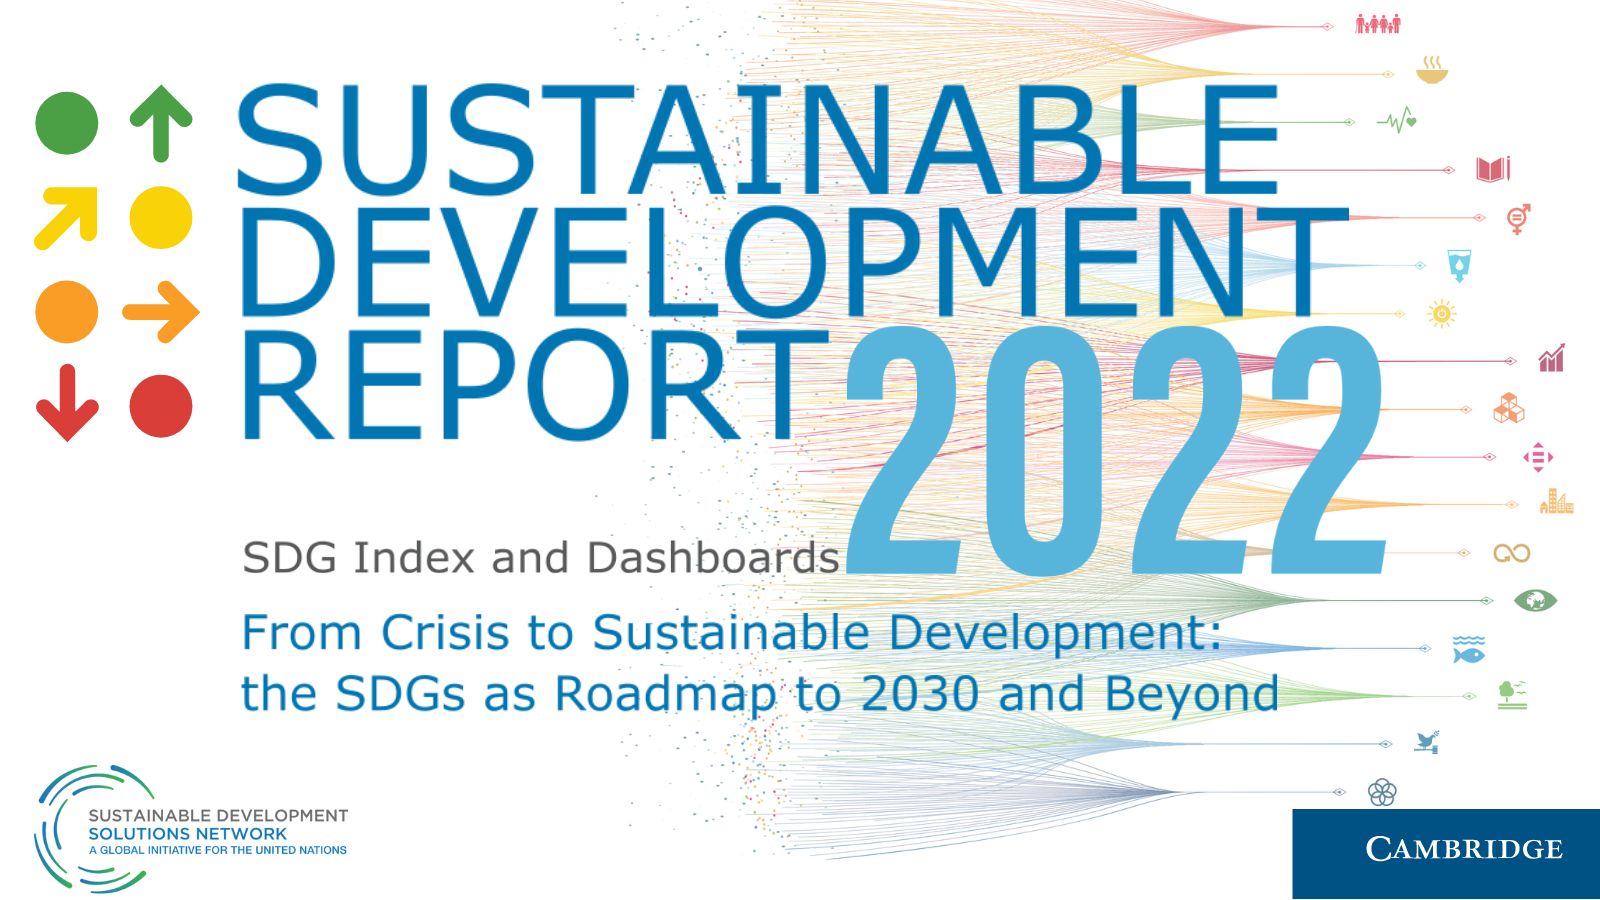 UNSDSN SUSTAINABLE DEVELOPMENT REPORT 2022